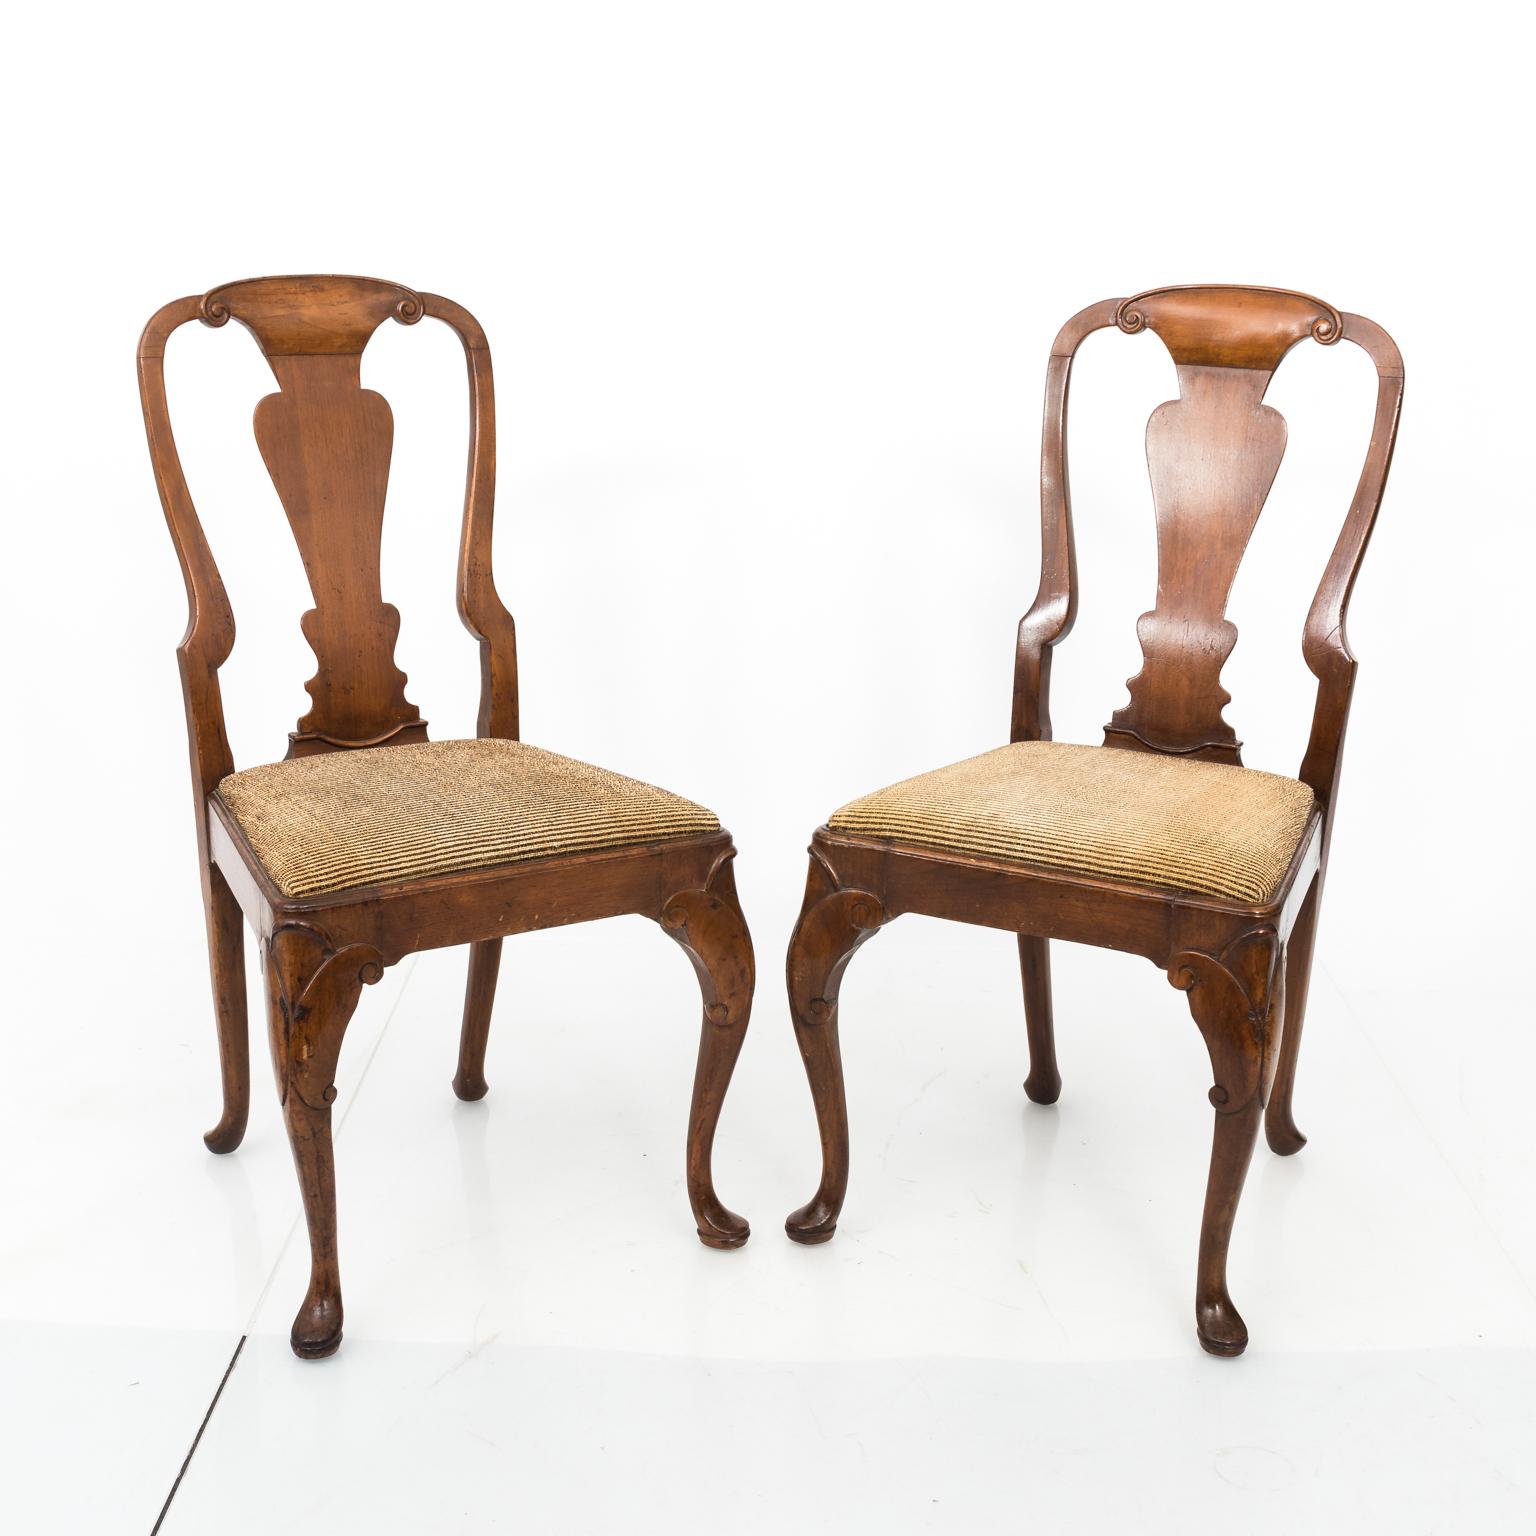 Pair of Early 19th Century Queen Anne Side Chairs 1